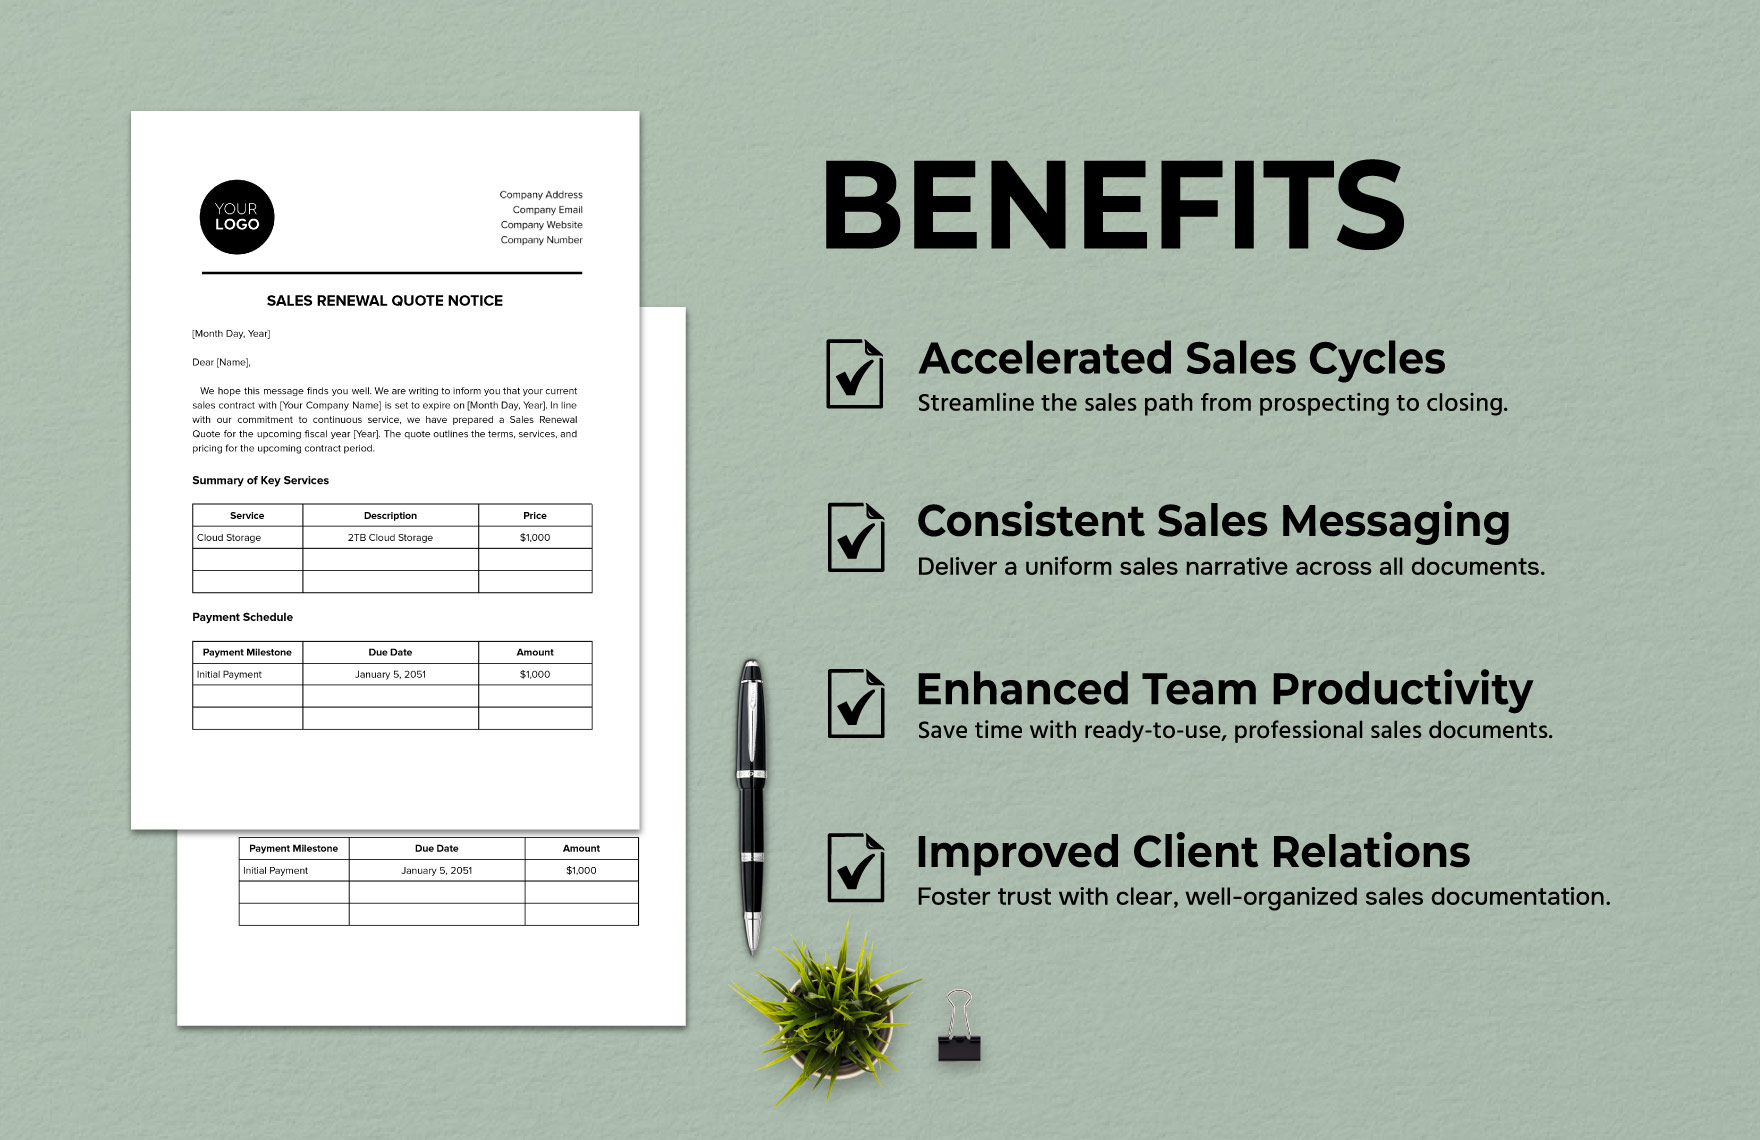 Sales Renewal Quote Notice Template